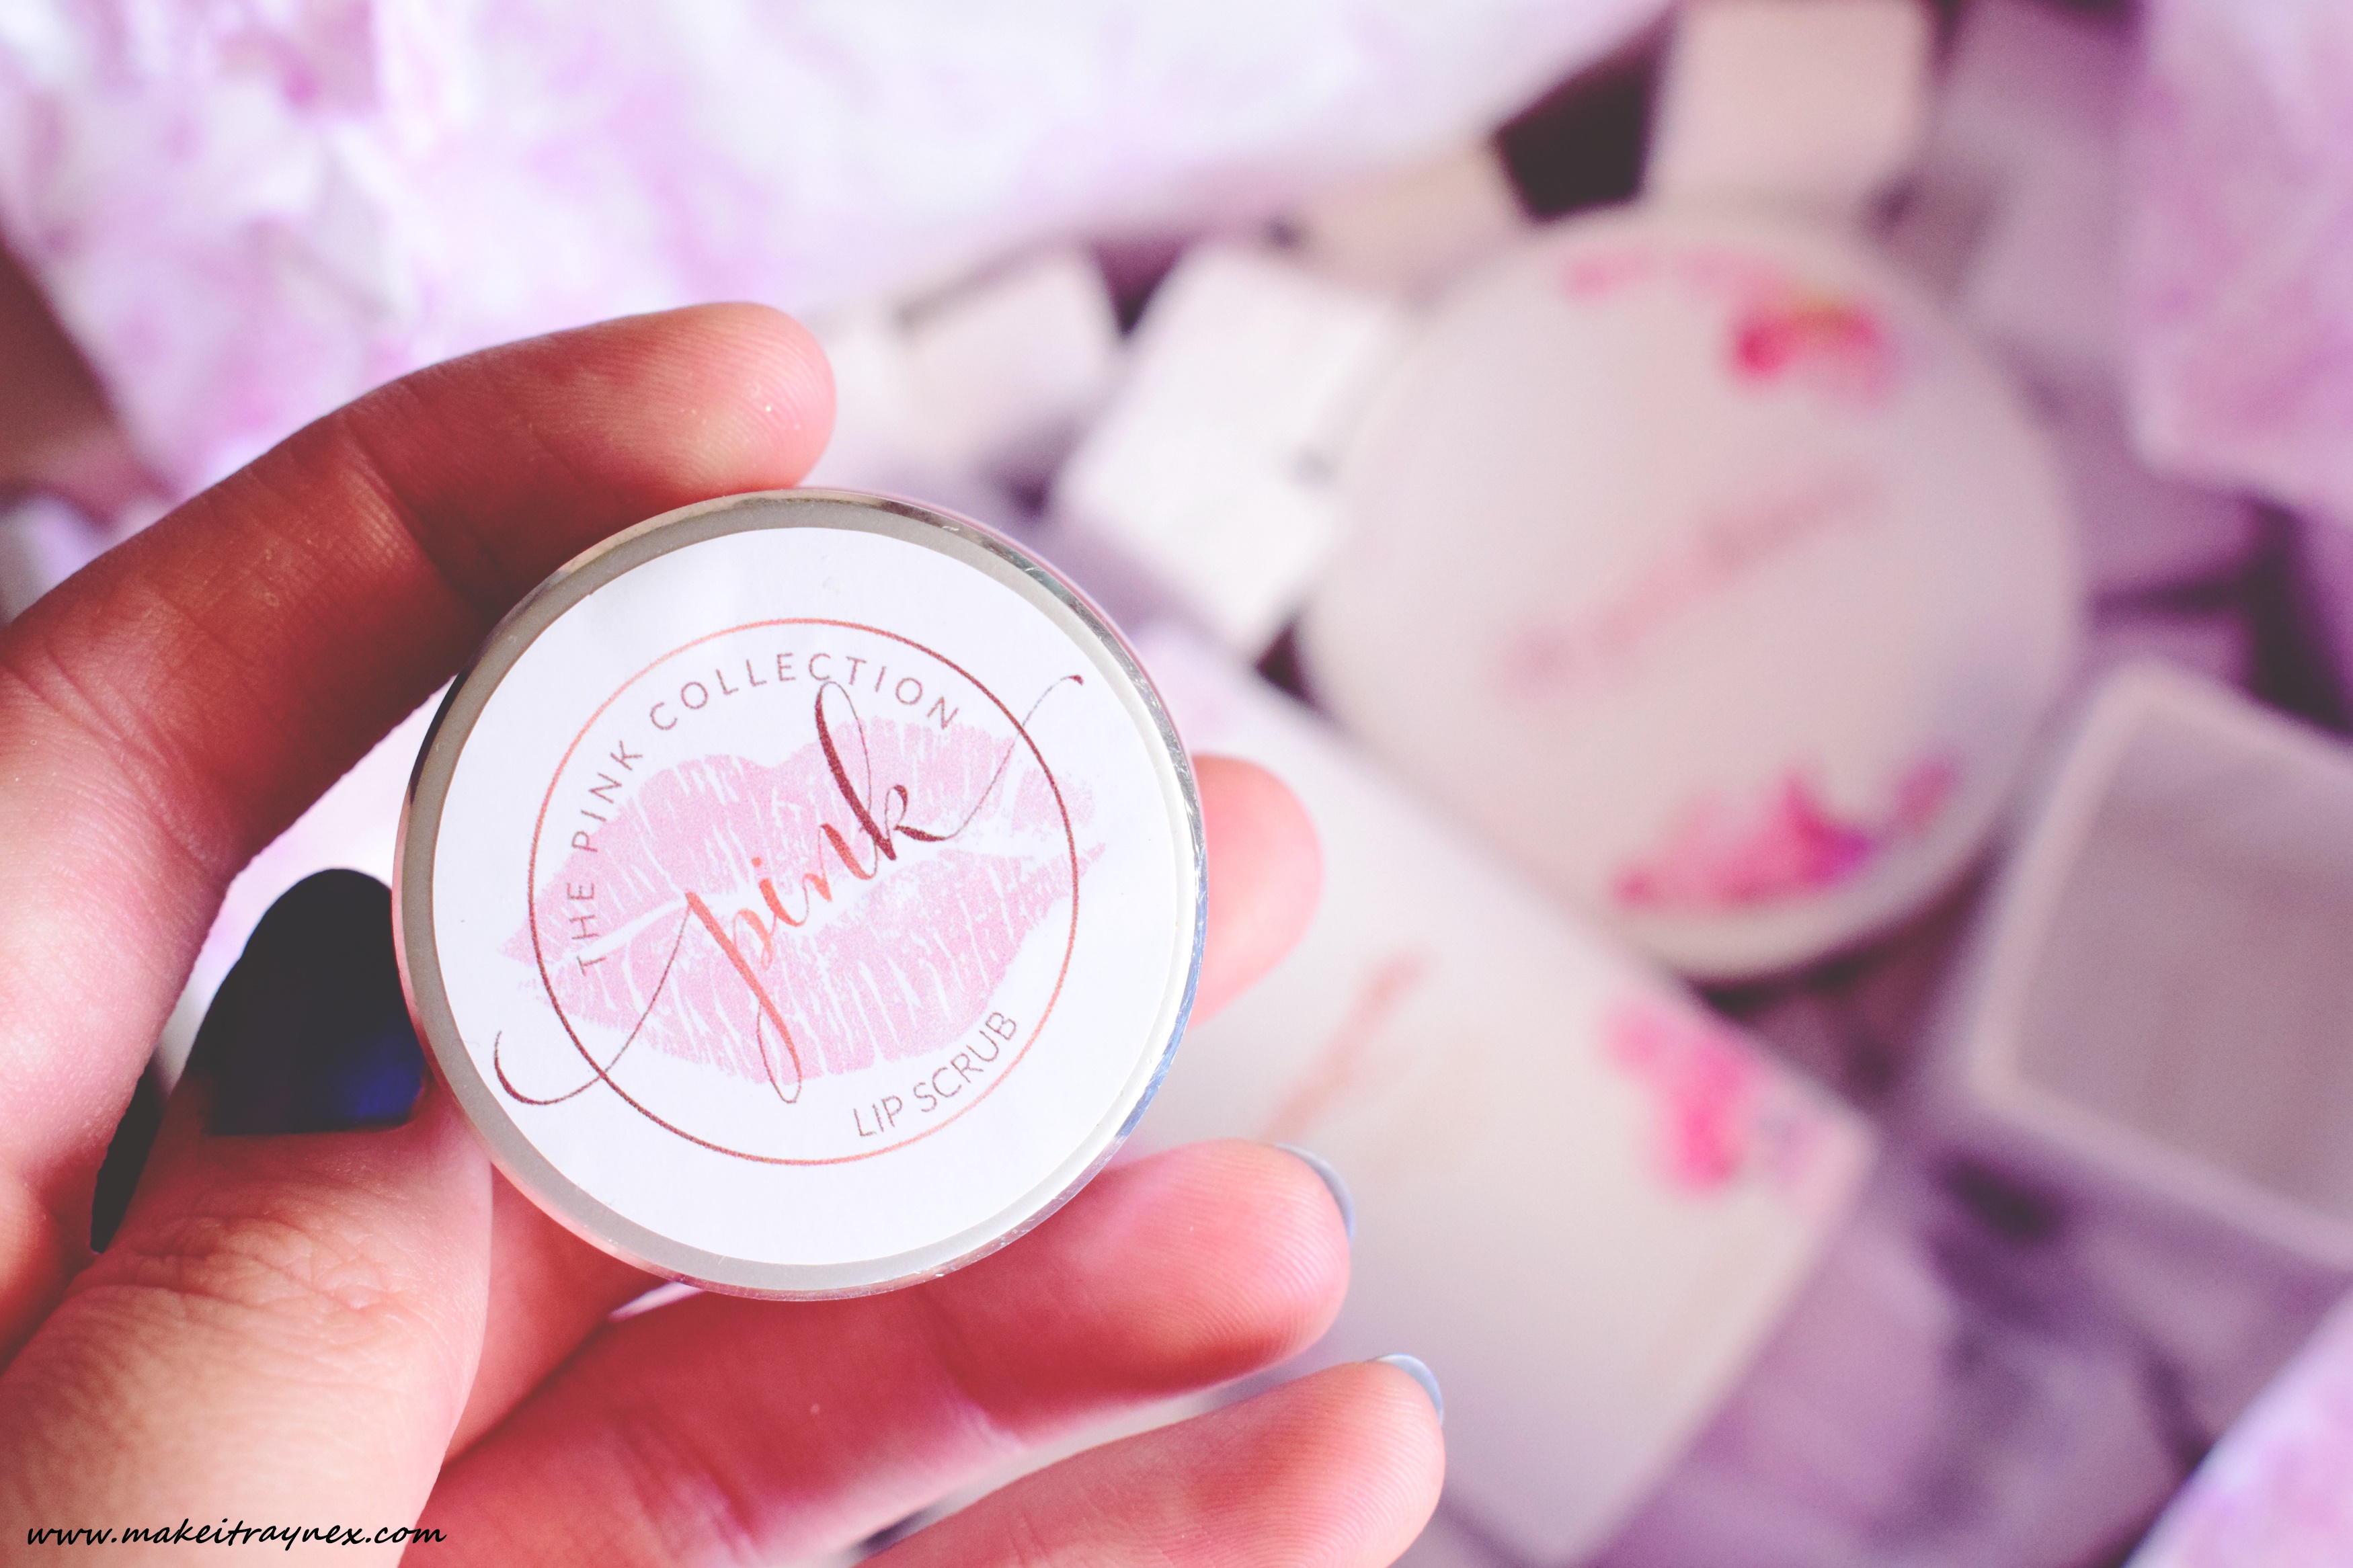 Introducing… local South African brand: Pink Cosmetics